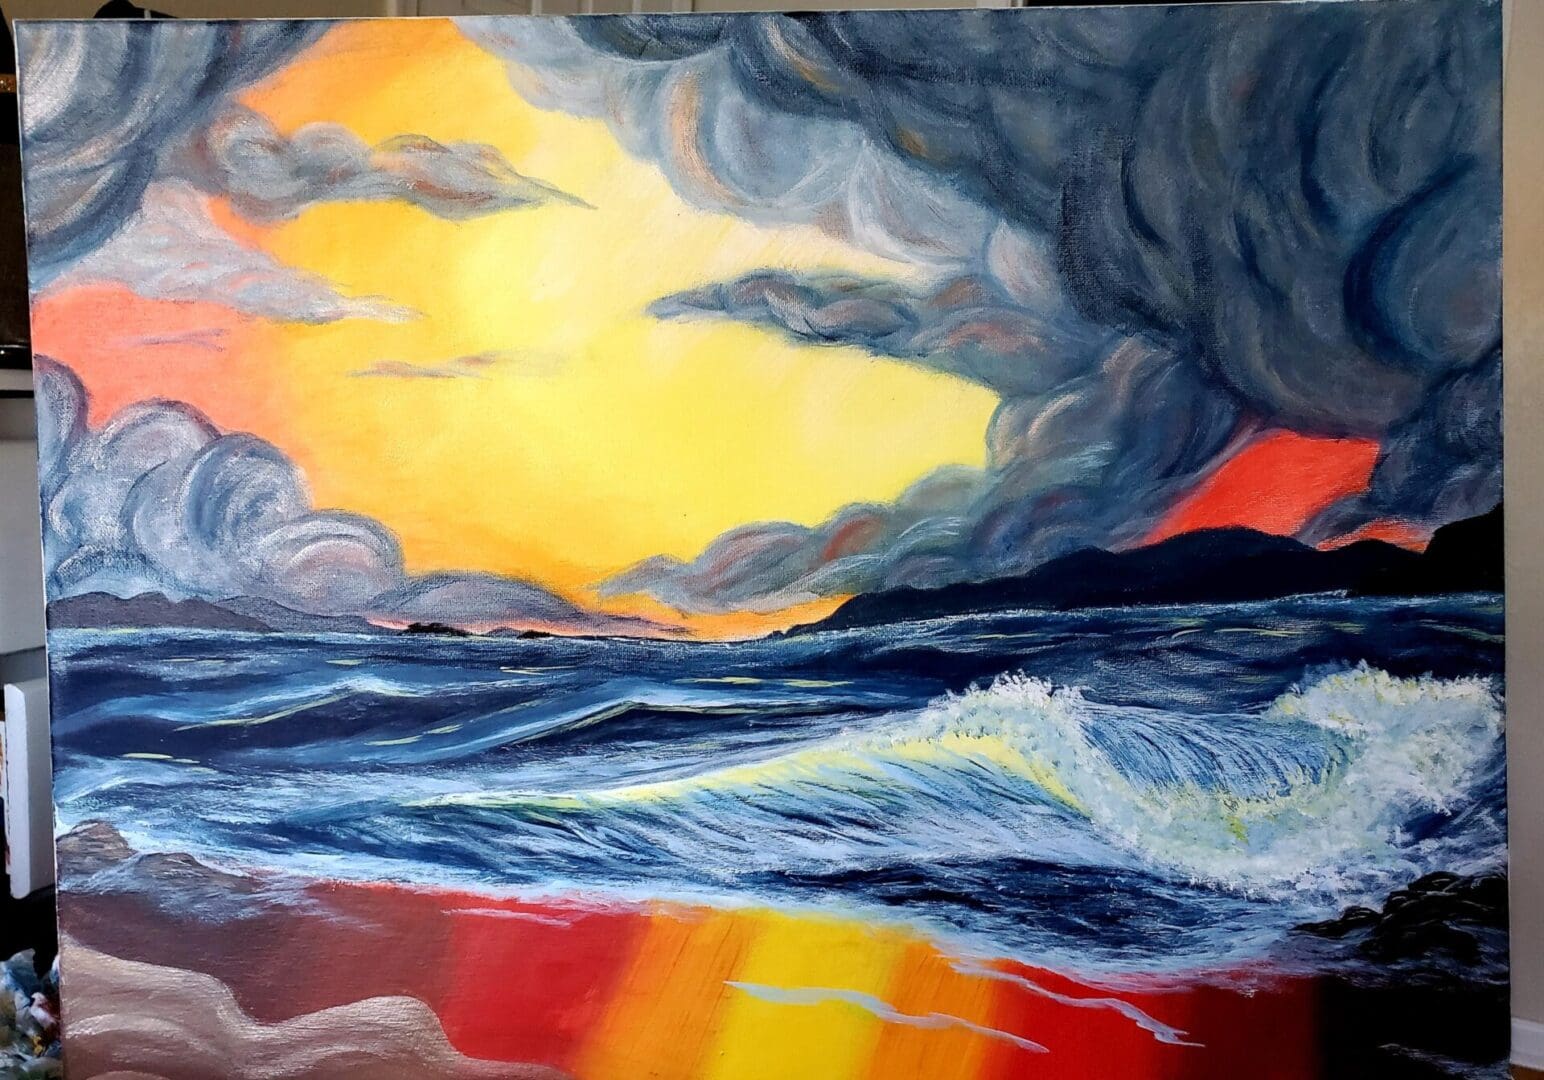 A painting of the ocean with waves and clouds.